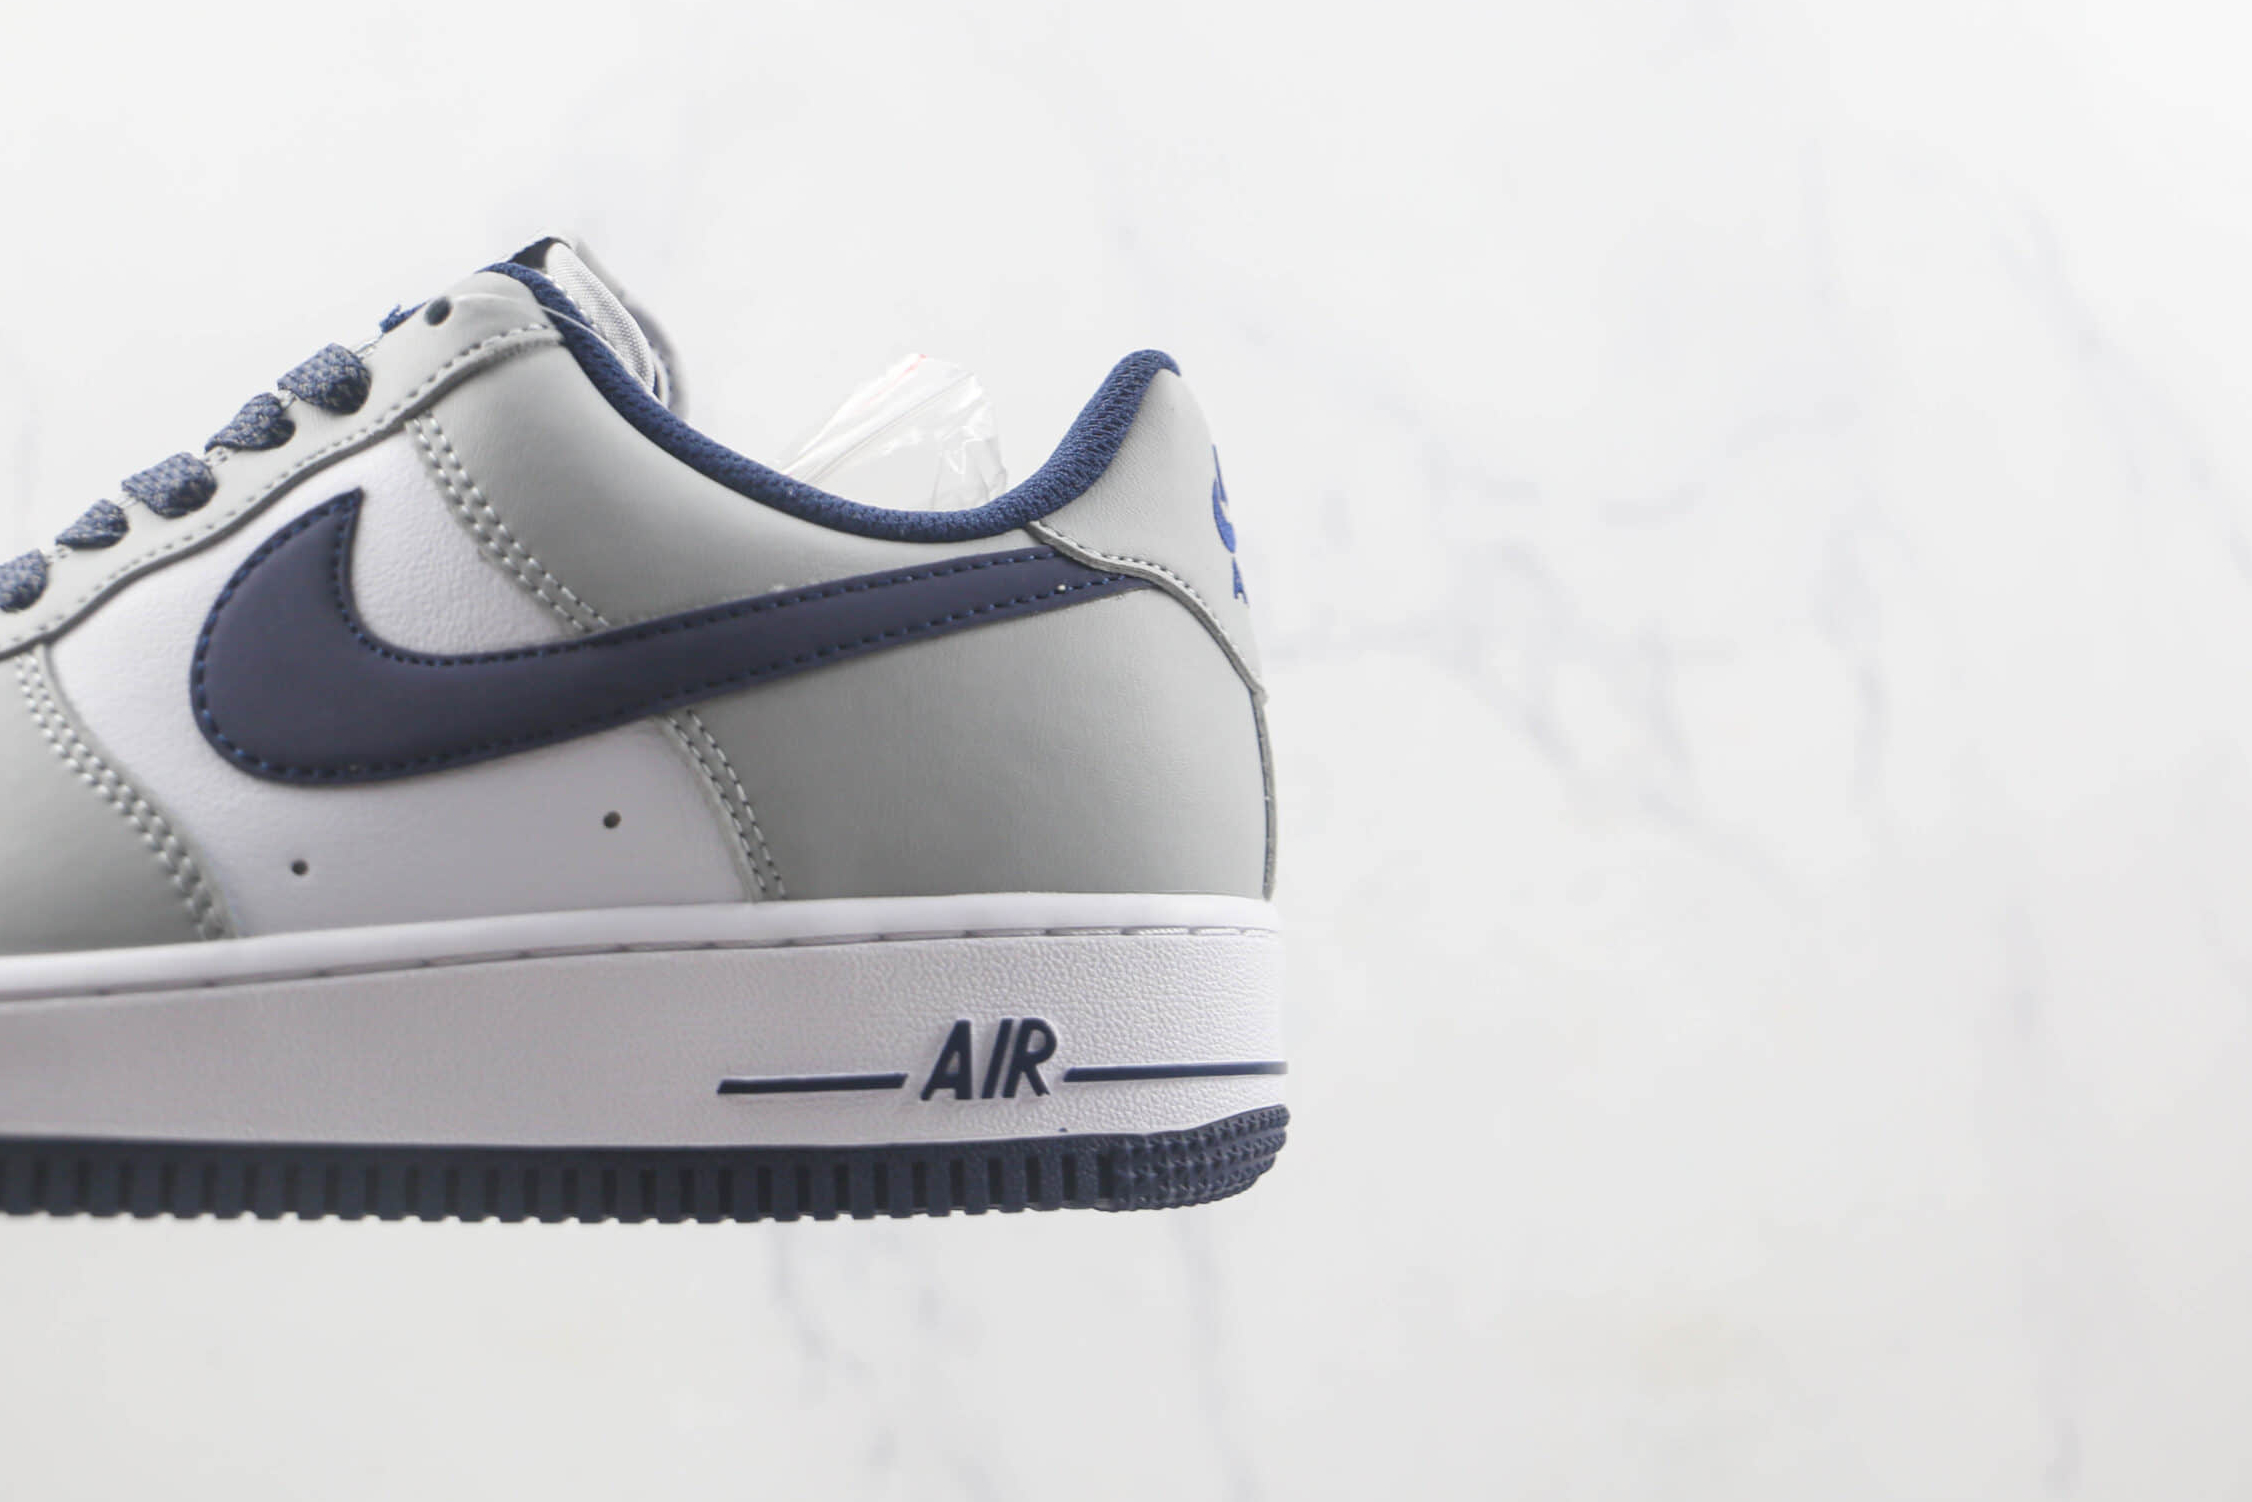 Nike Air Force 1 07 Low Grey Blue White KU5696-002 - Stylish and Iconic Sneakers